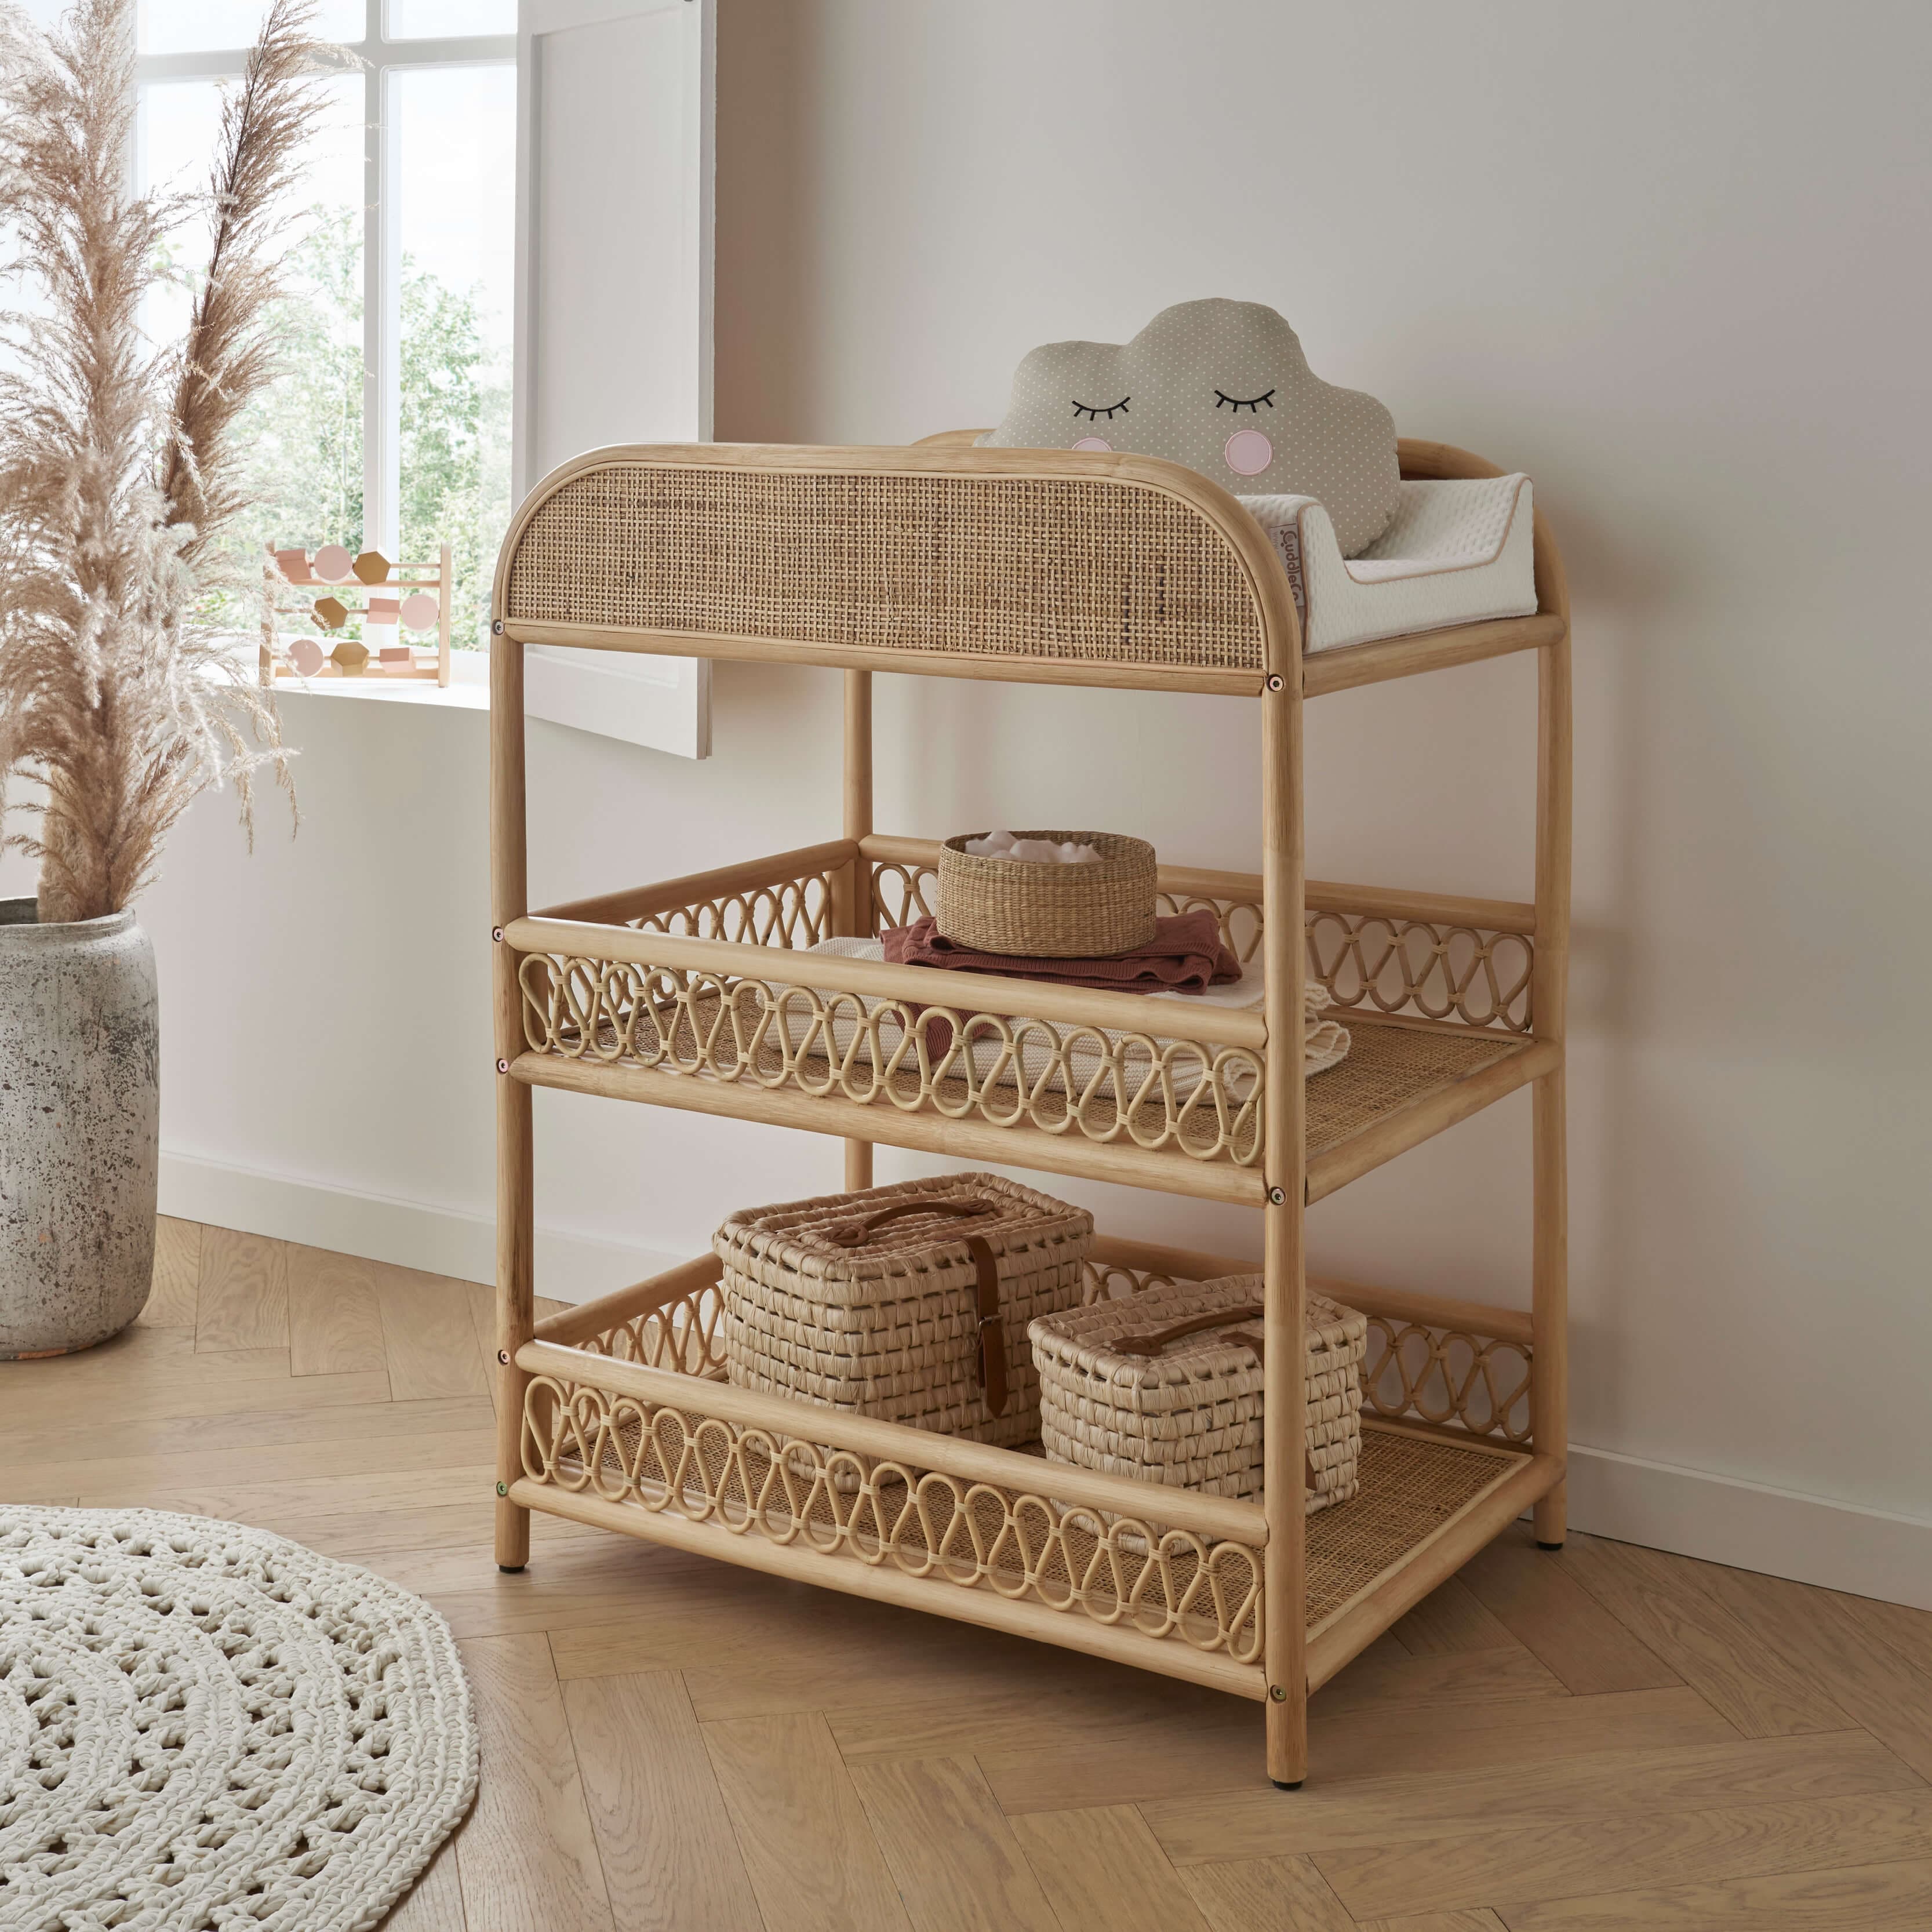 Cuddleco Aria 3 Piece Nursery Furniture Set - Rattan -  | For Your Little One